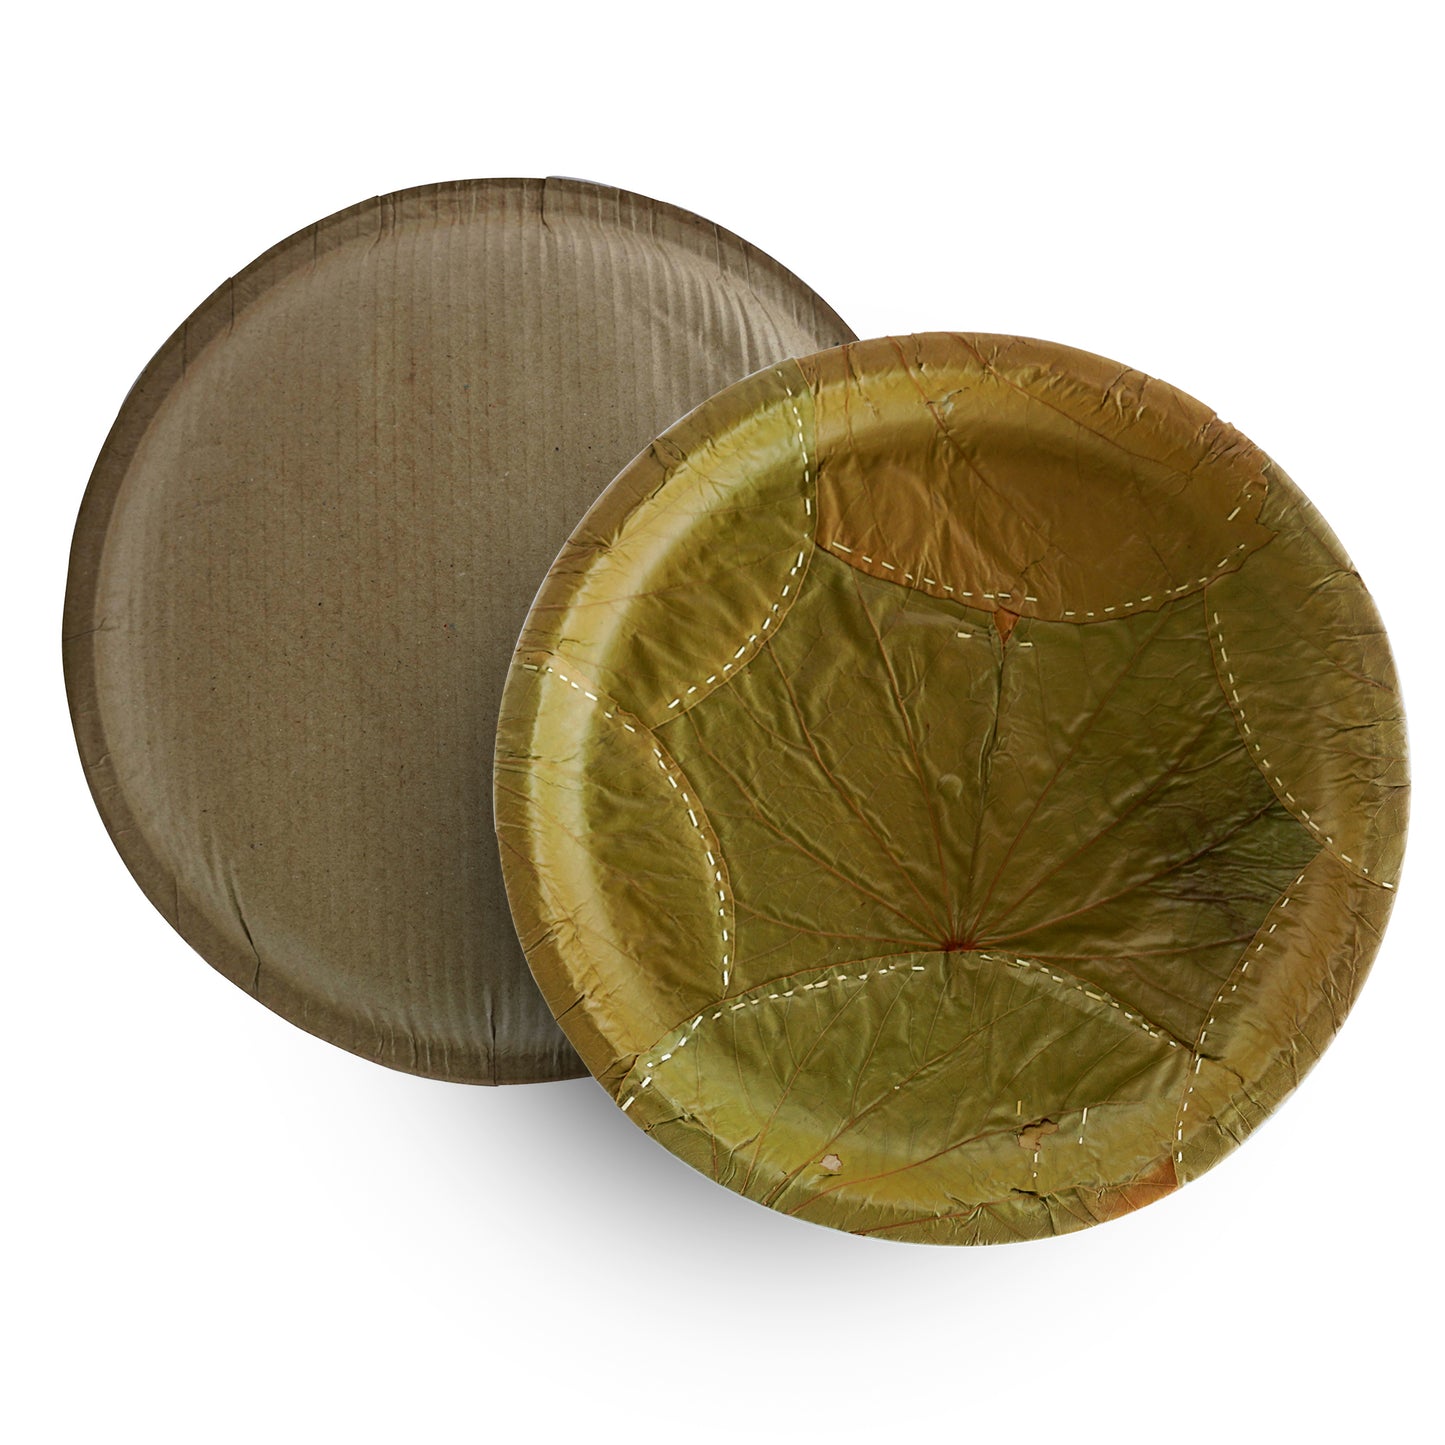 Eco-Friendly Vistaraku Leaf Plate Set - Siali (Bauhinia vahlii) and Palash Leaves | Biodegradable Disposable Plates for Parties, Weddings, BBQs & Traditional Events| Zero Waste | 12-inch Size | Pack of 25